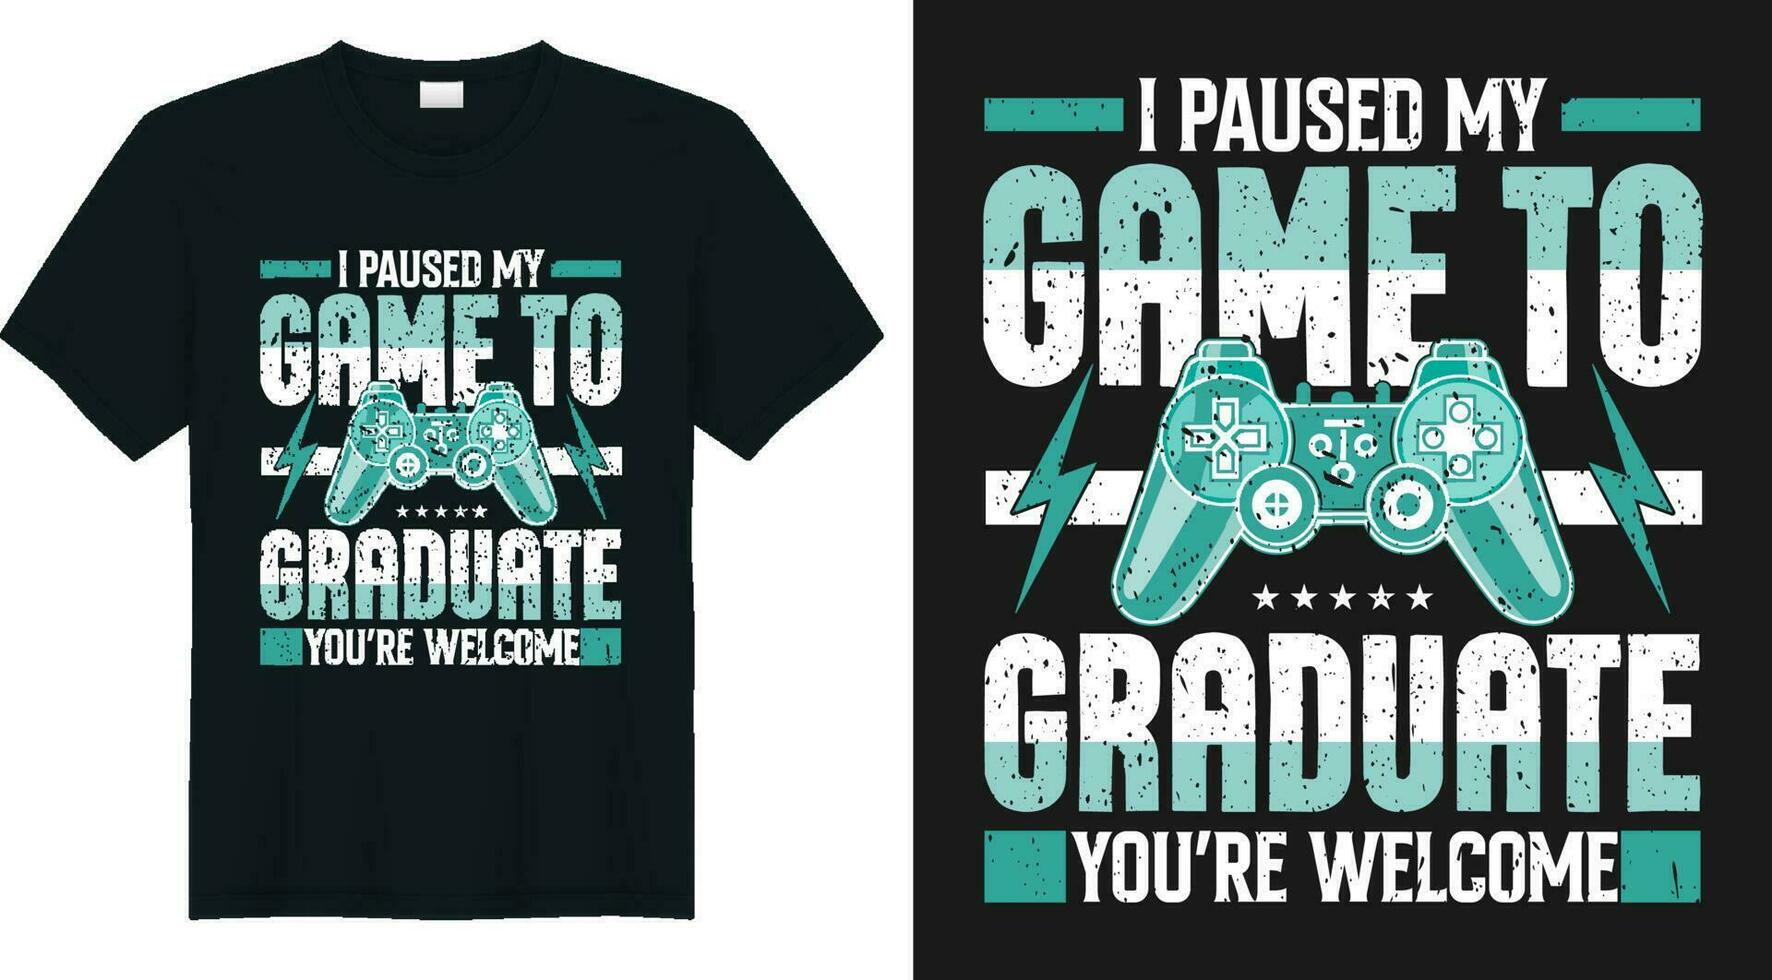 I paused my game to be graduate you're welcome vintage gamer gift t shirt vector